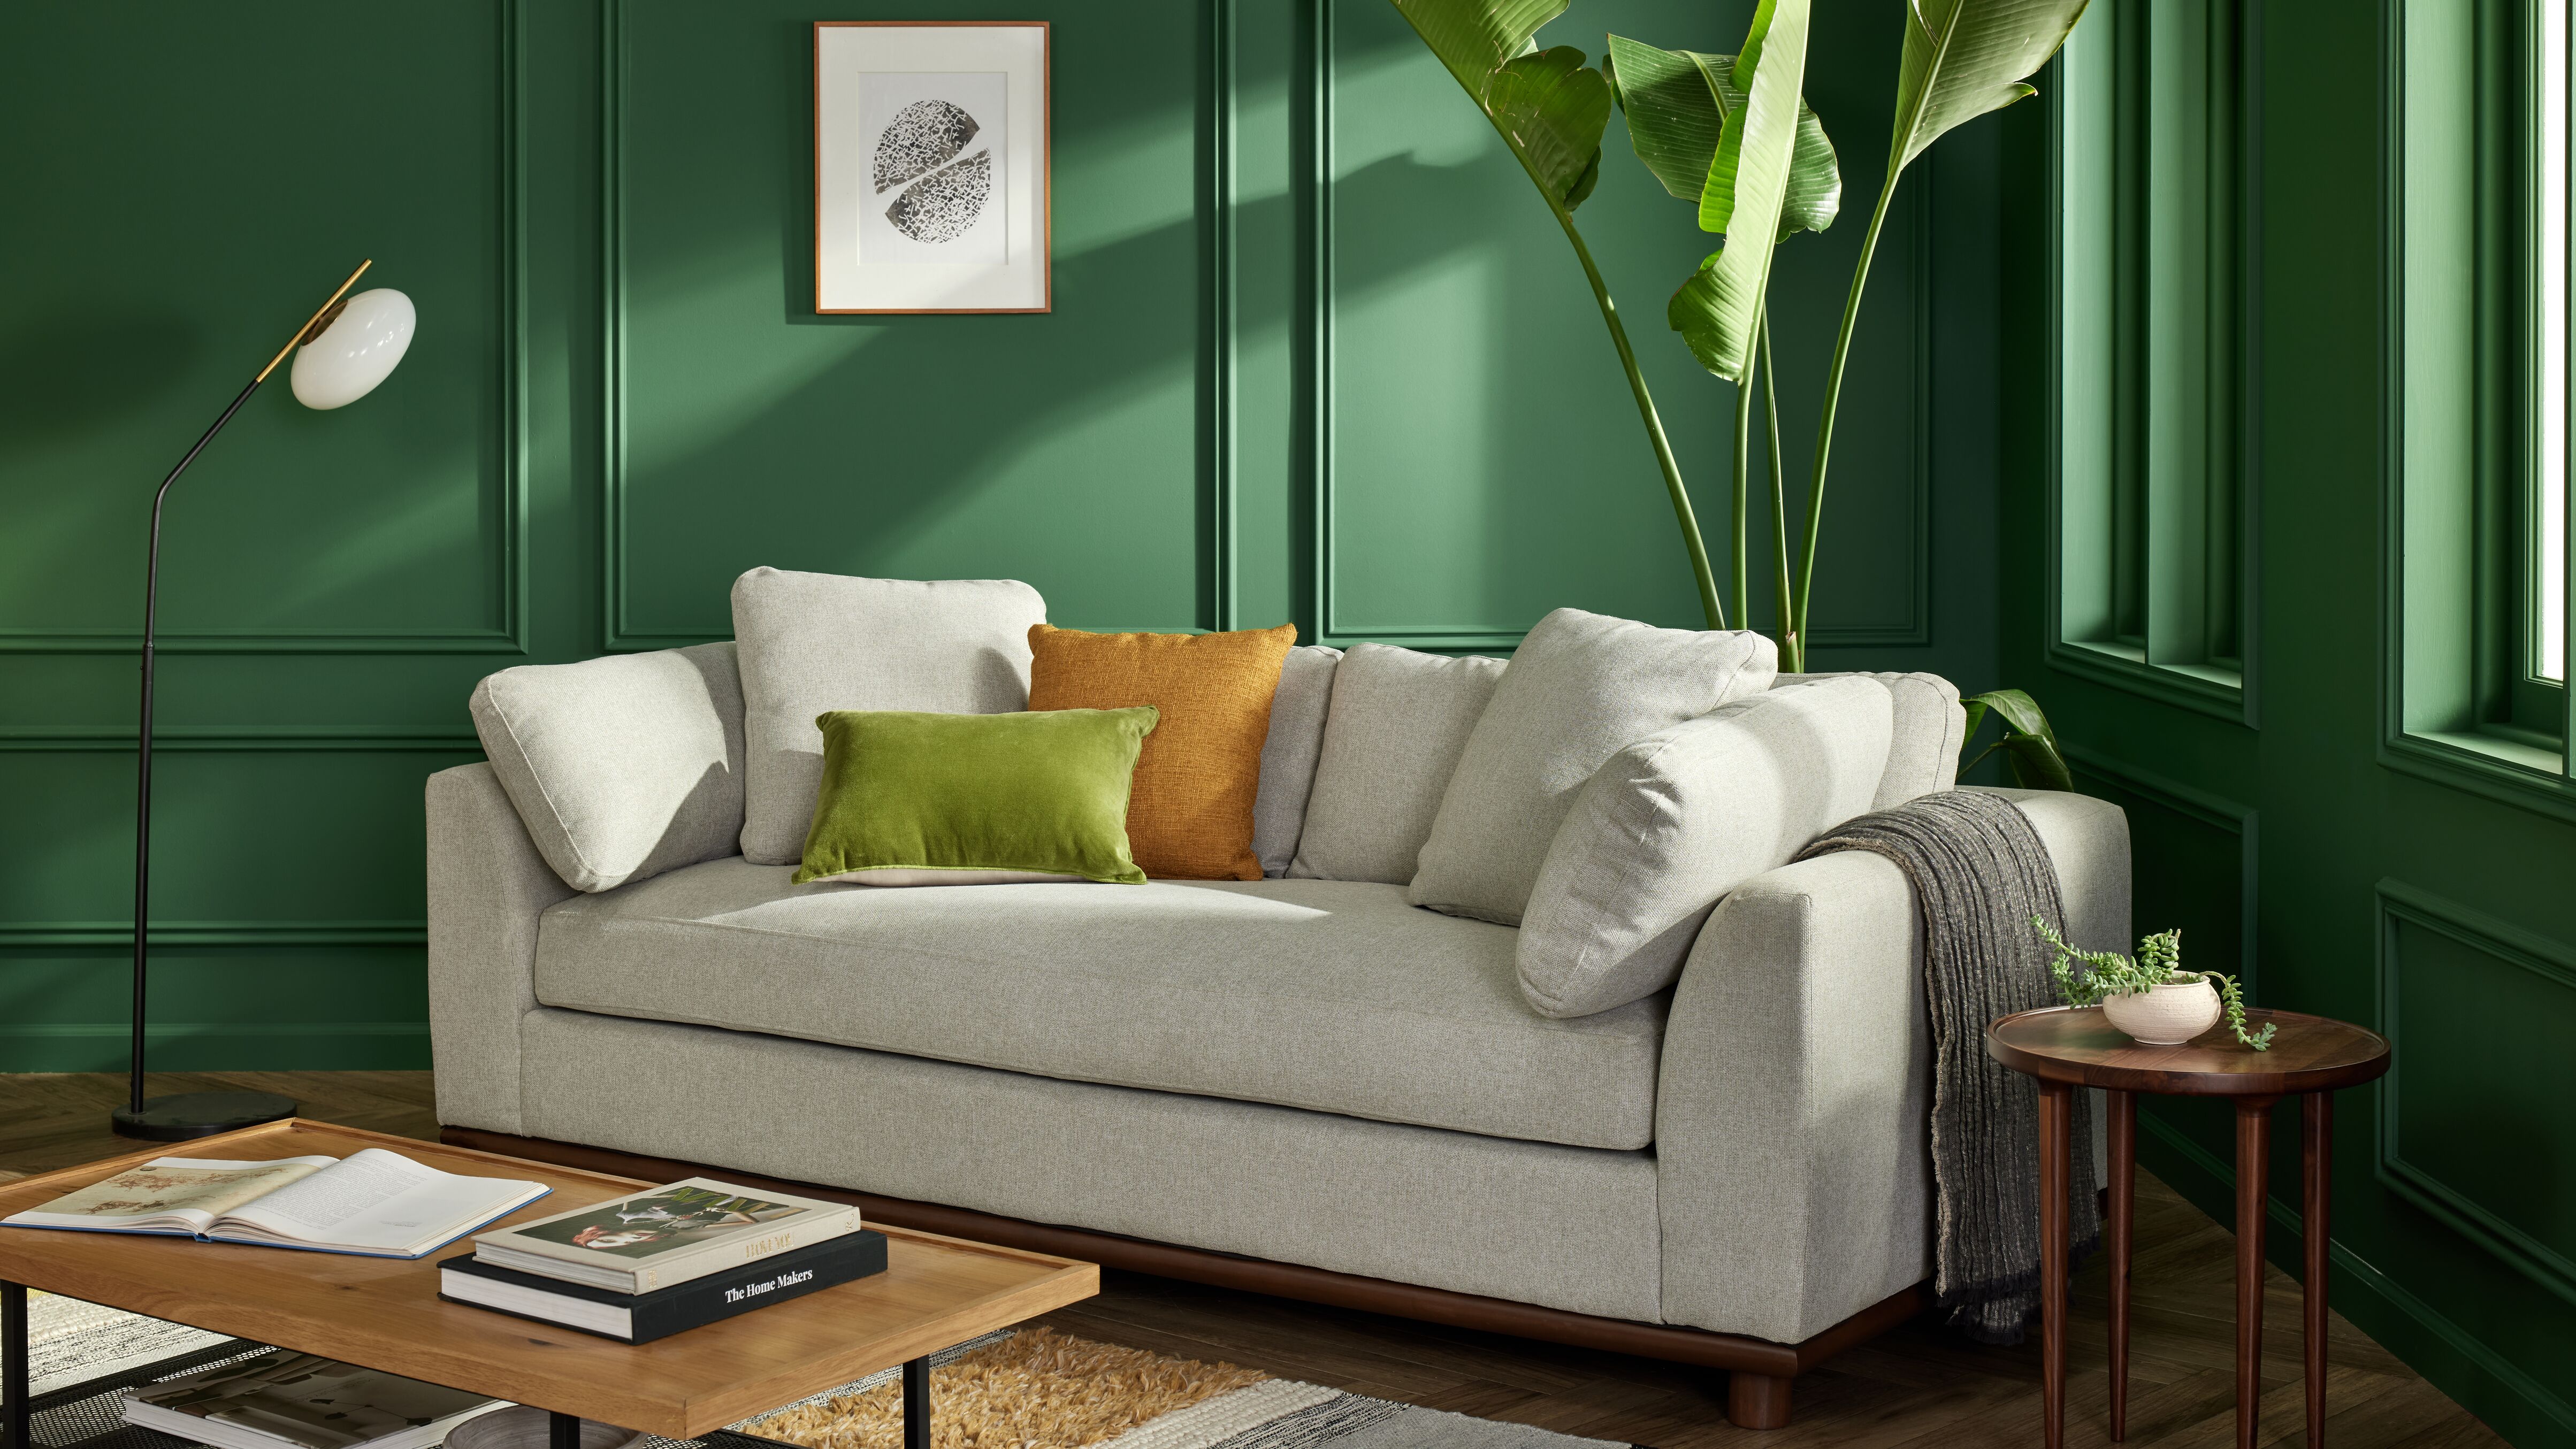 How to Choose the Right Sofa Color for Your Space | Joybird